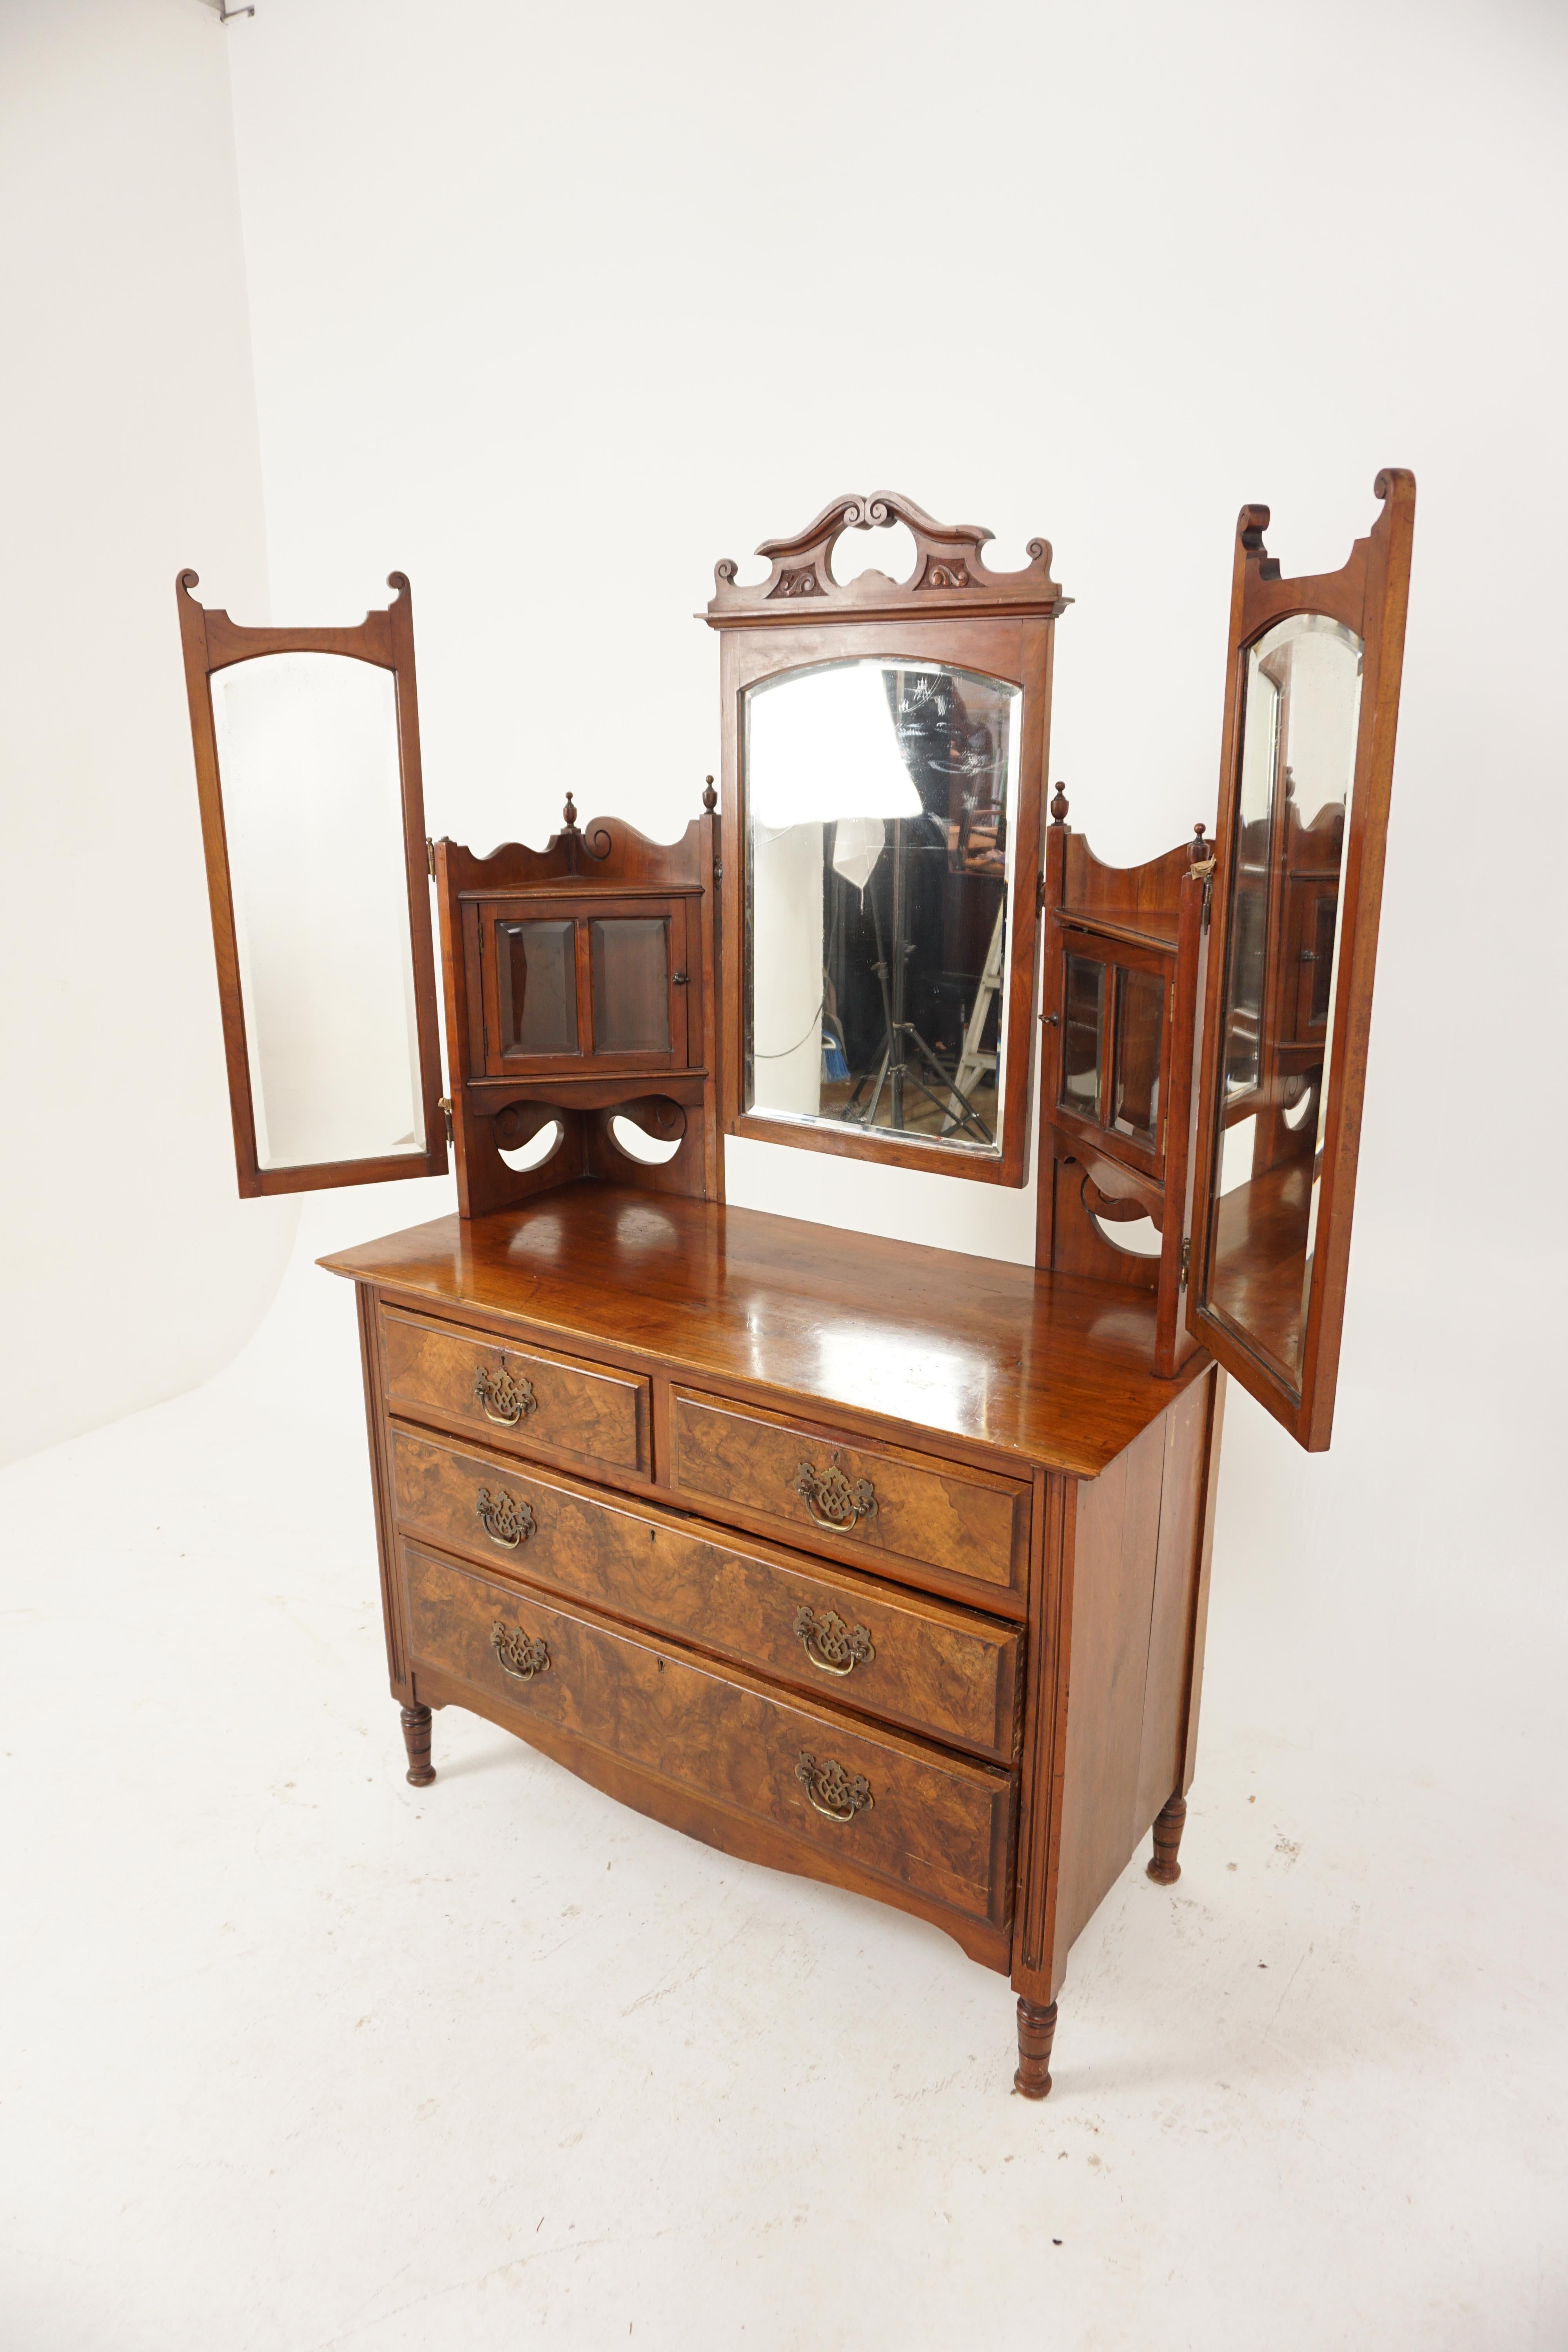 Antique Victorian walnut triple mirrored vanity, dressing chest, taable, Scotland 1880, B2895

Scotland 1880
Solid walnut & veneers
Original finish
Having a carved pediment over the beveled central mirror
The mirror is supported by a pair of